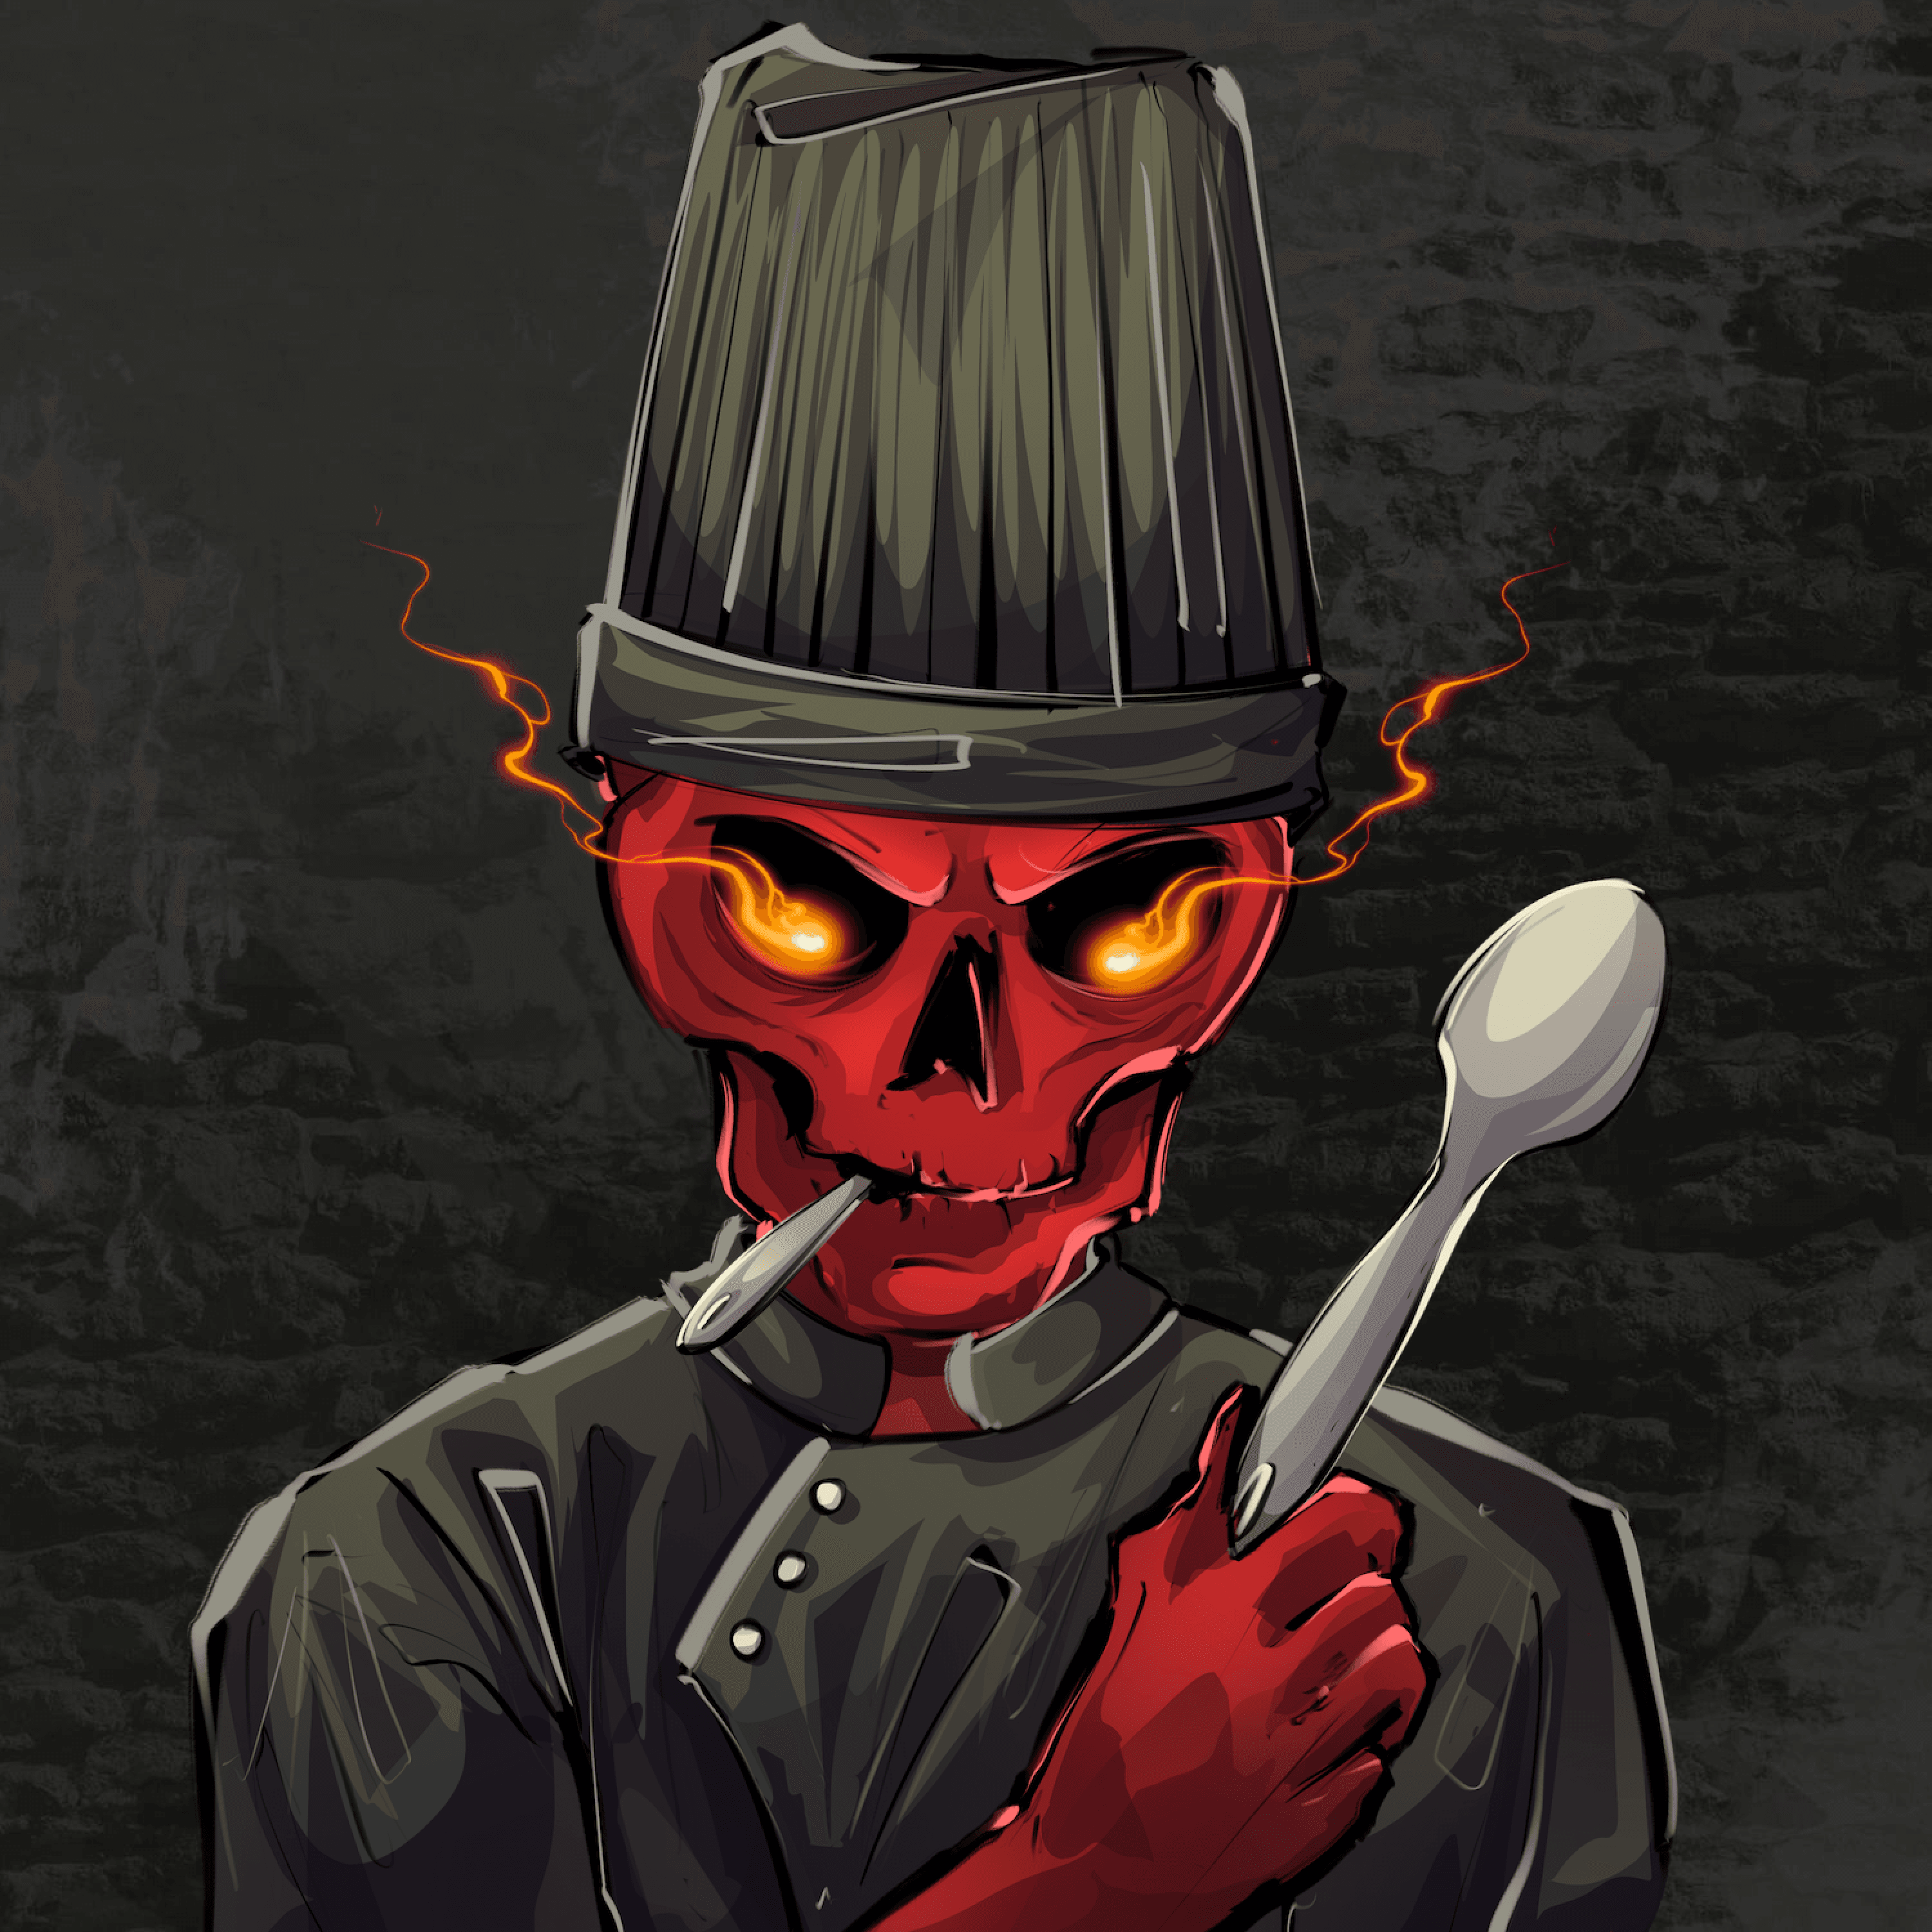 Undead Chefs #3493